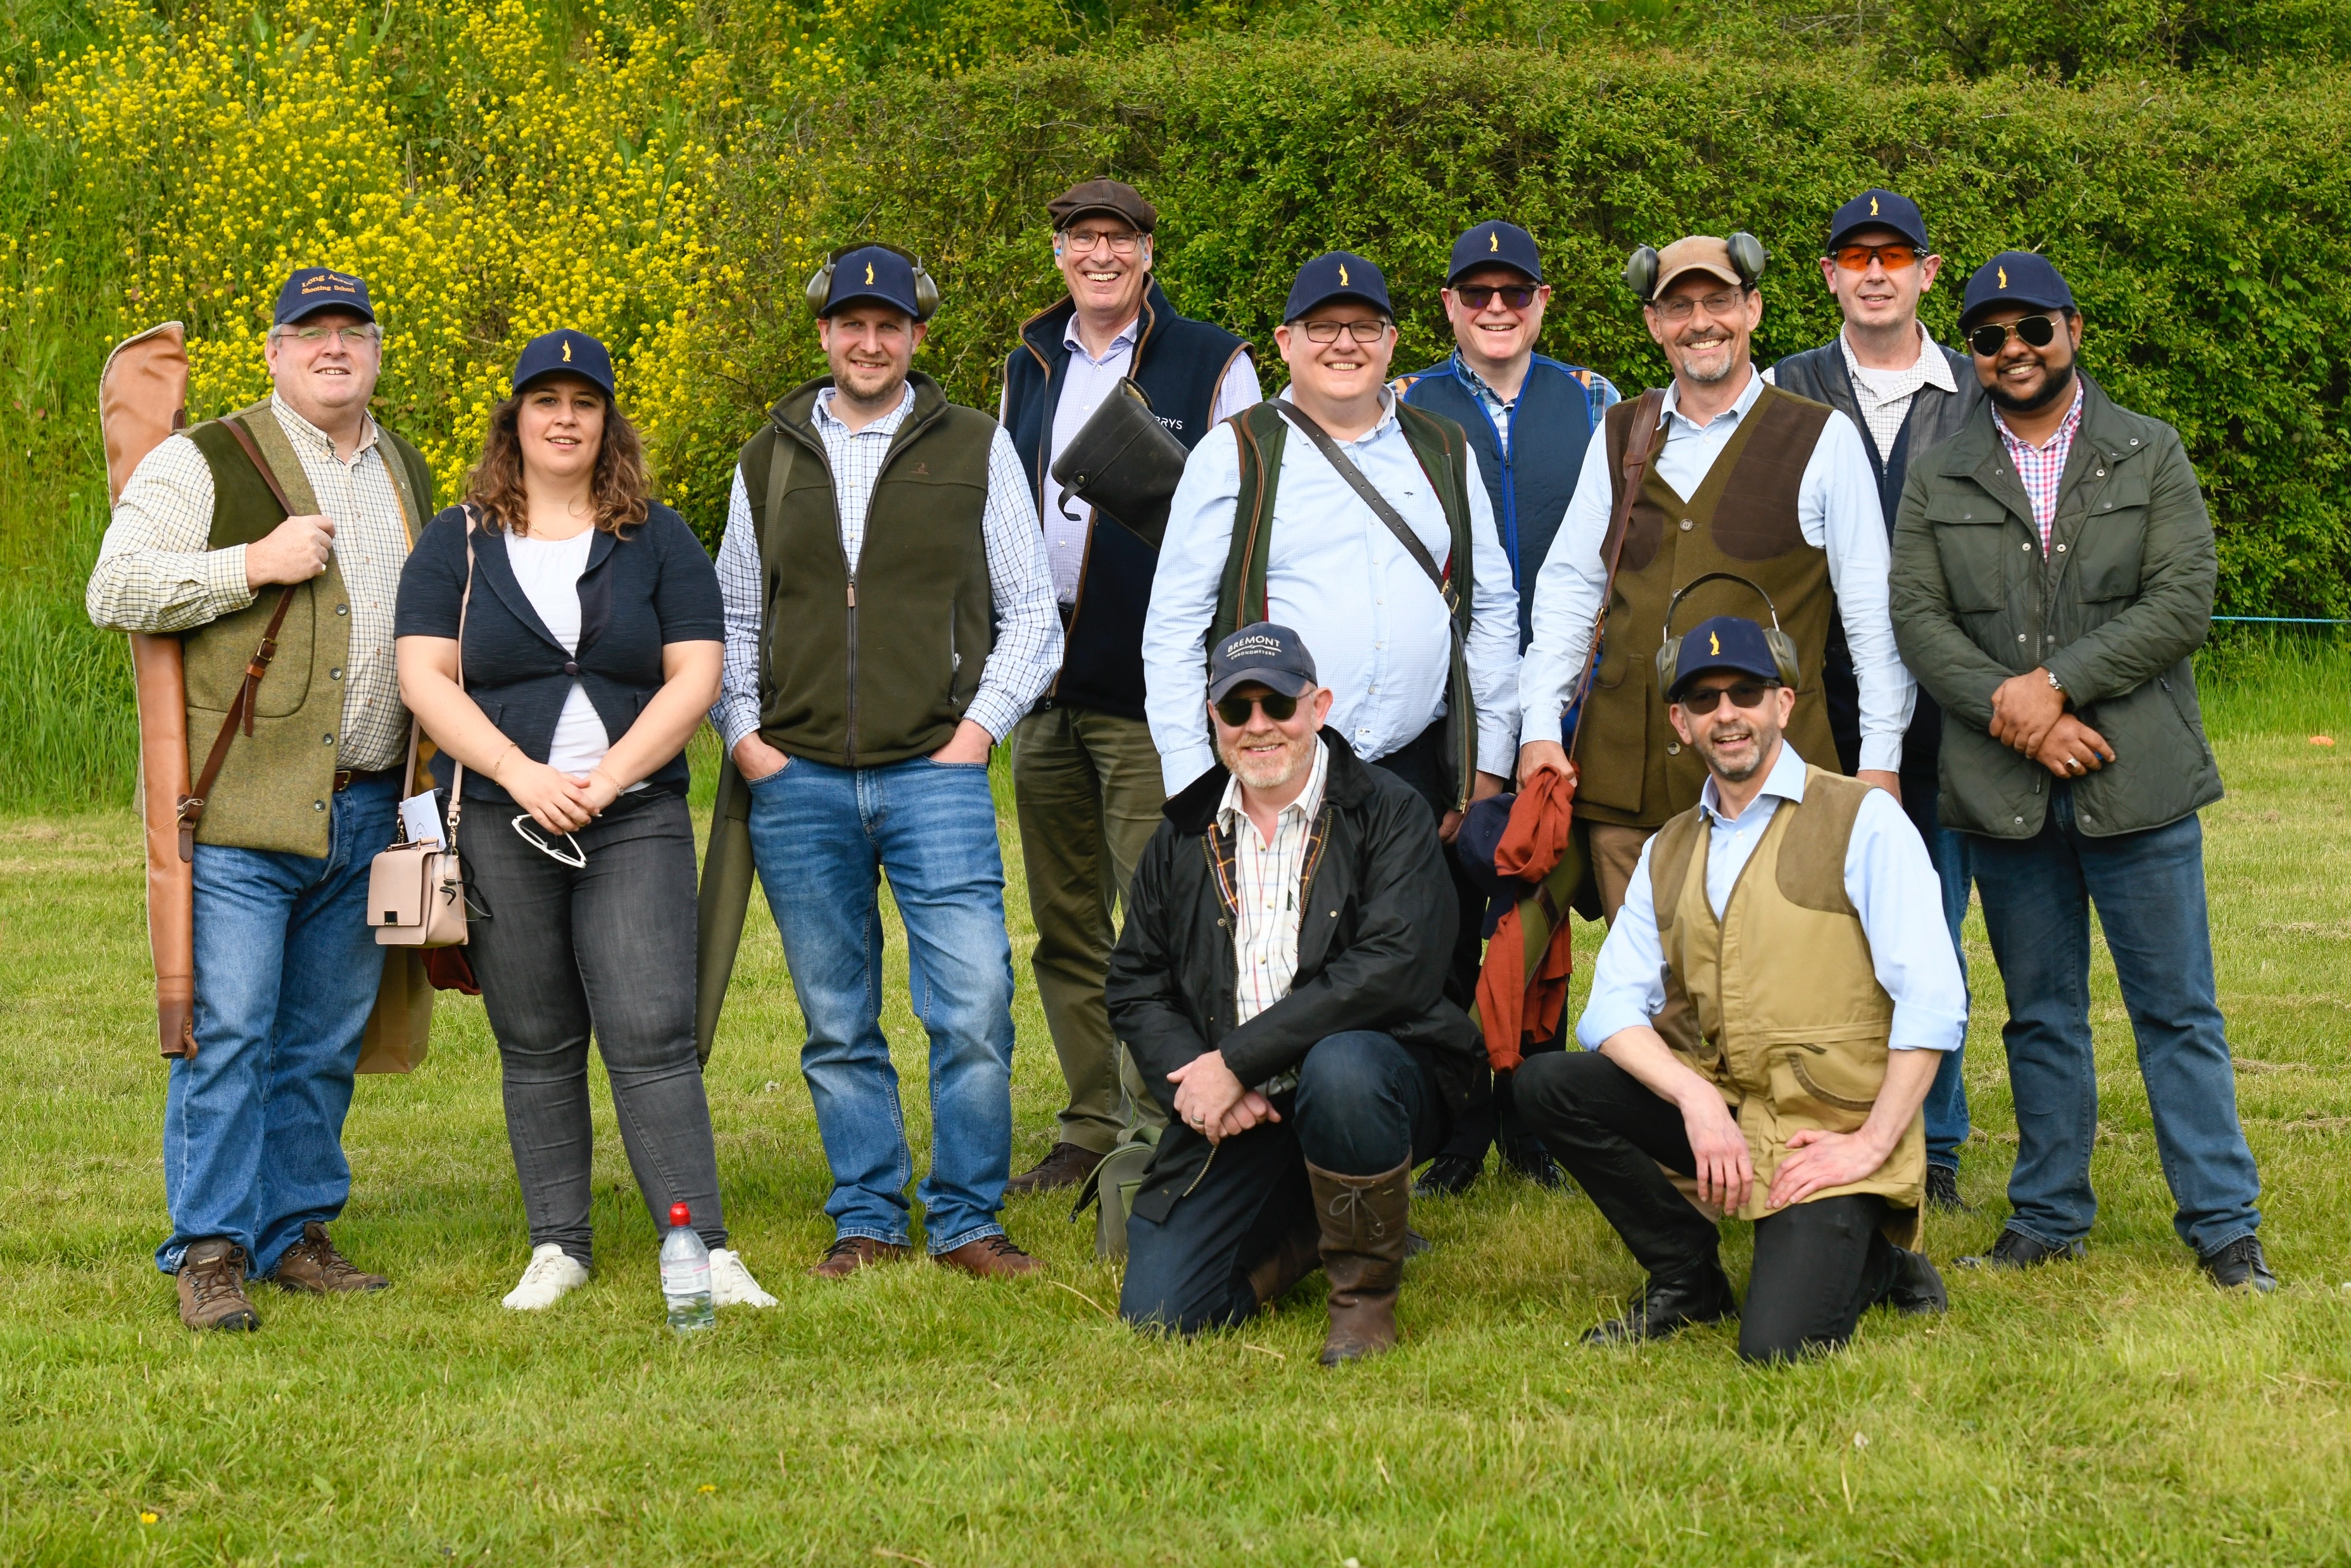 Annual Inter-Livery Clay Shoot Organised by Worshipful Company of Environmental Cleaners